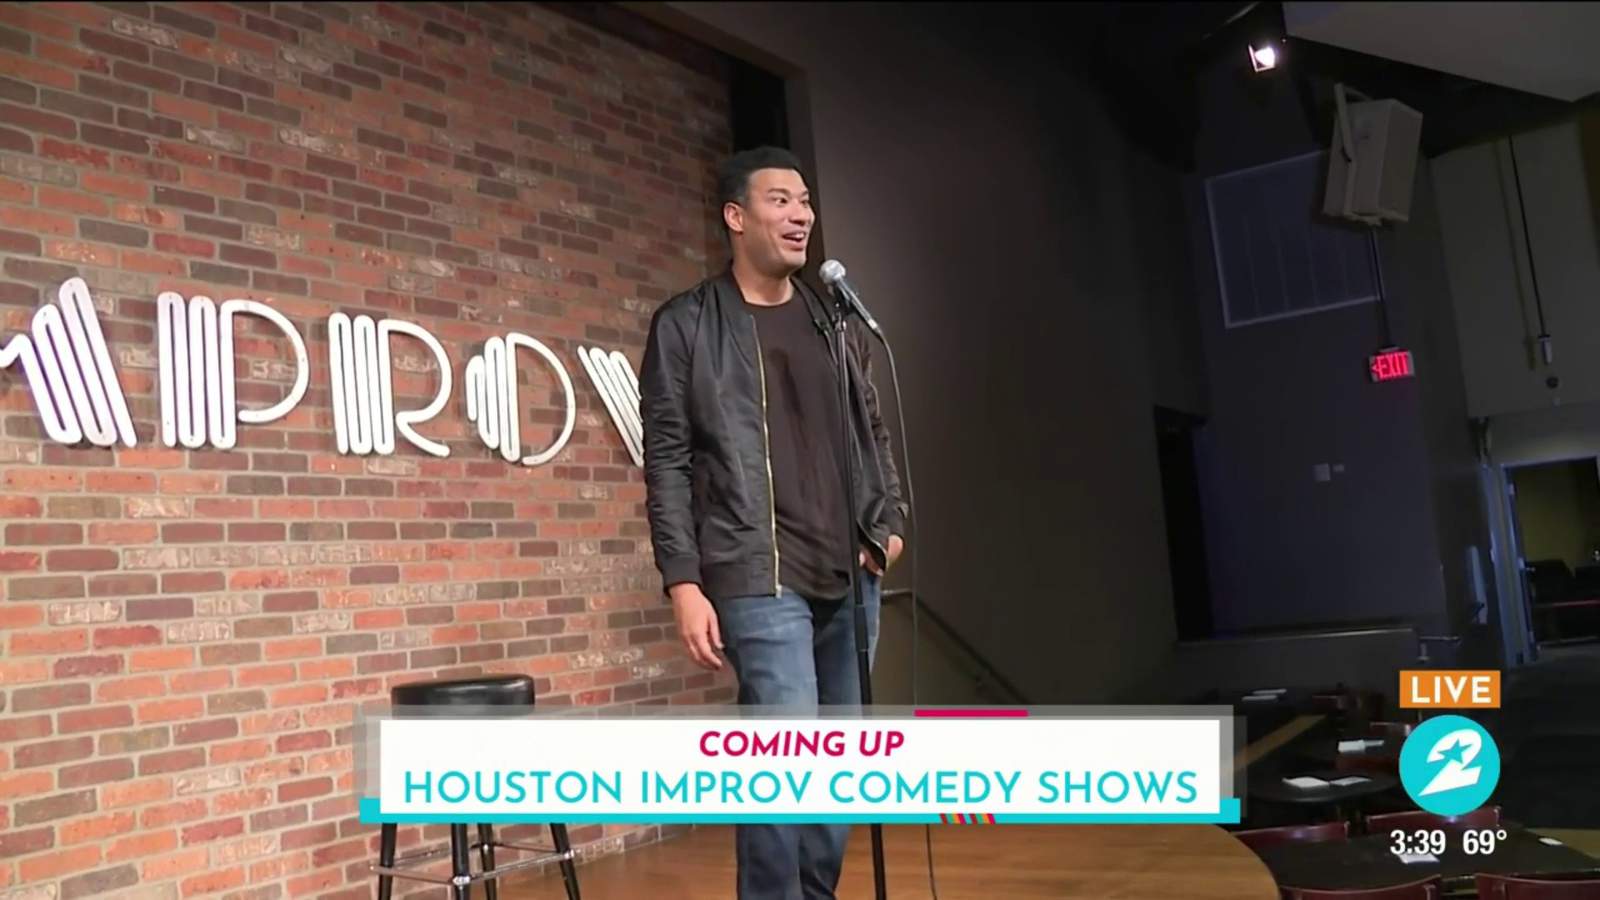 Comedian Michael Yo coming home to Houston to headline shows at the Improv